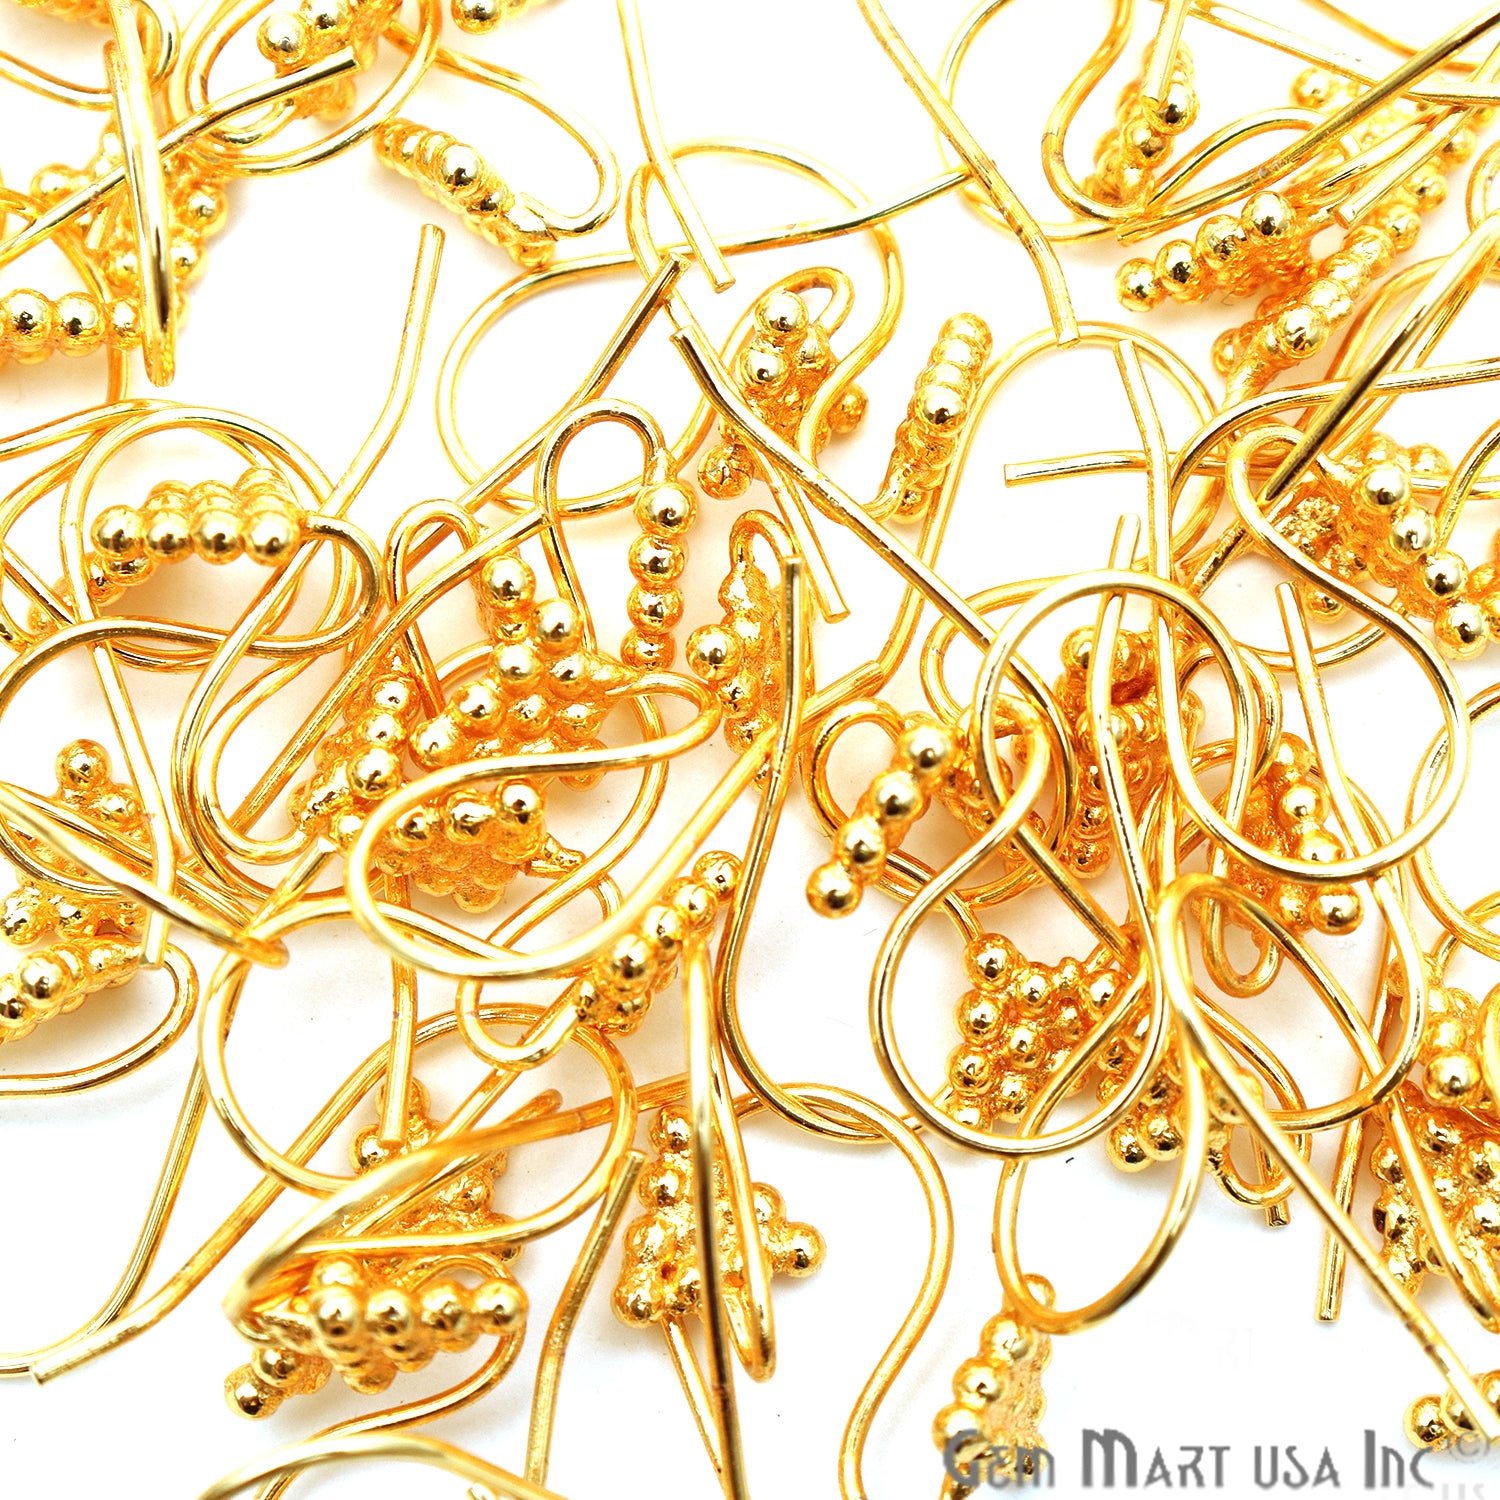 5 Pair Lot Gold Plated 23x10mm Earring Fish Hooks Findings - GemMartUSA